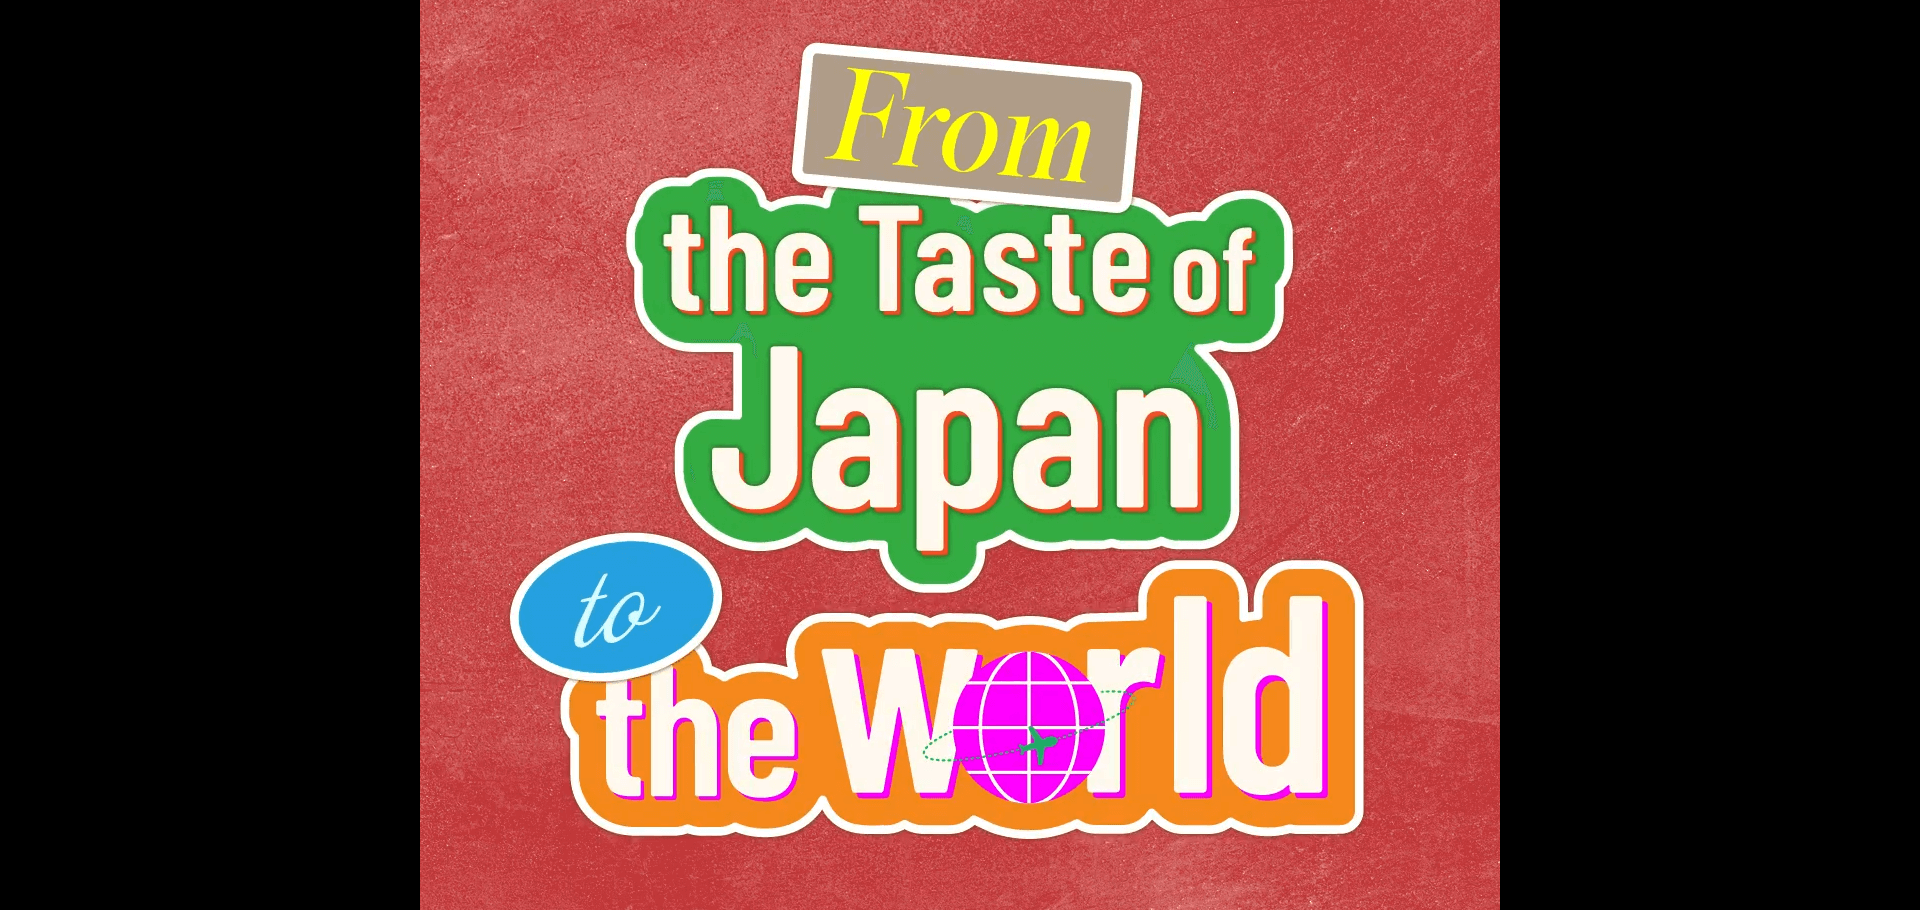 From the Taste of Japan to the World